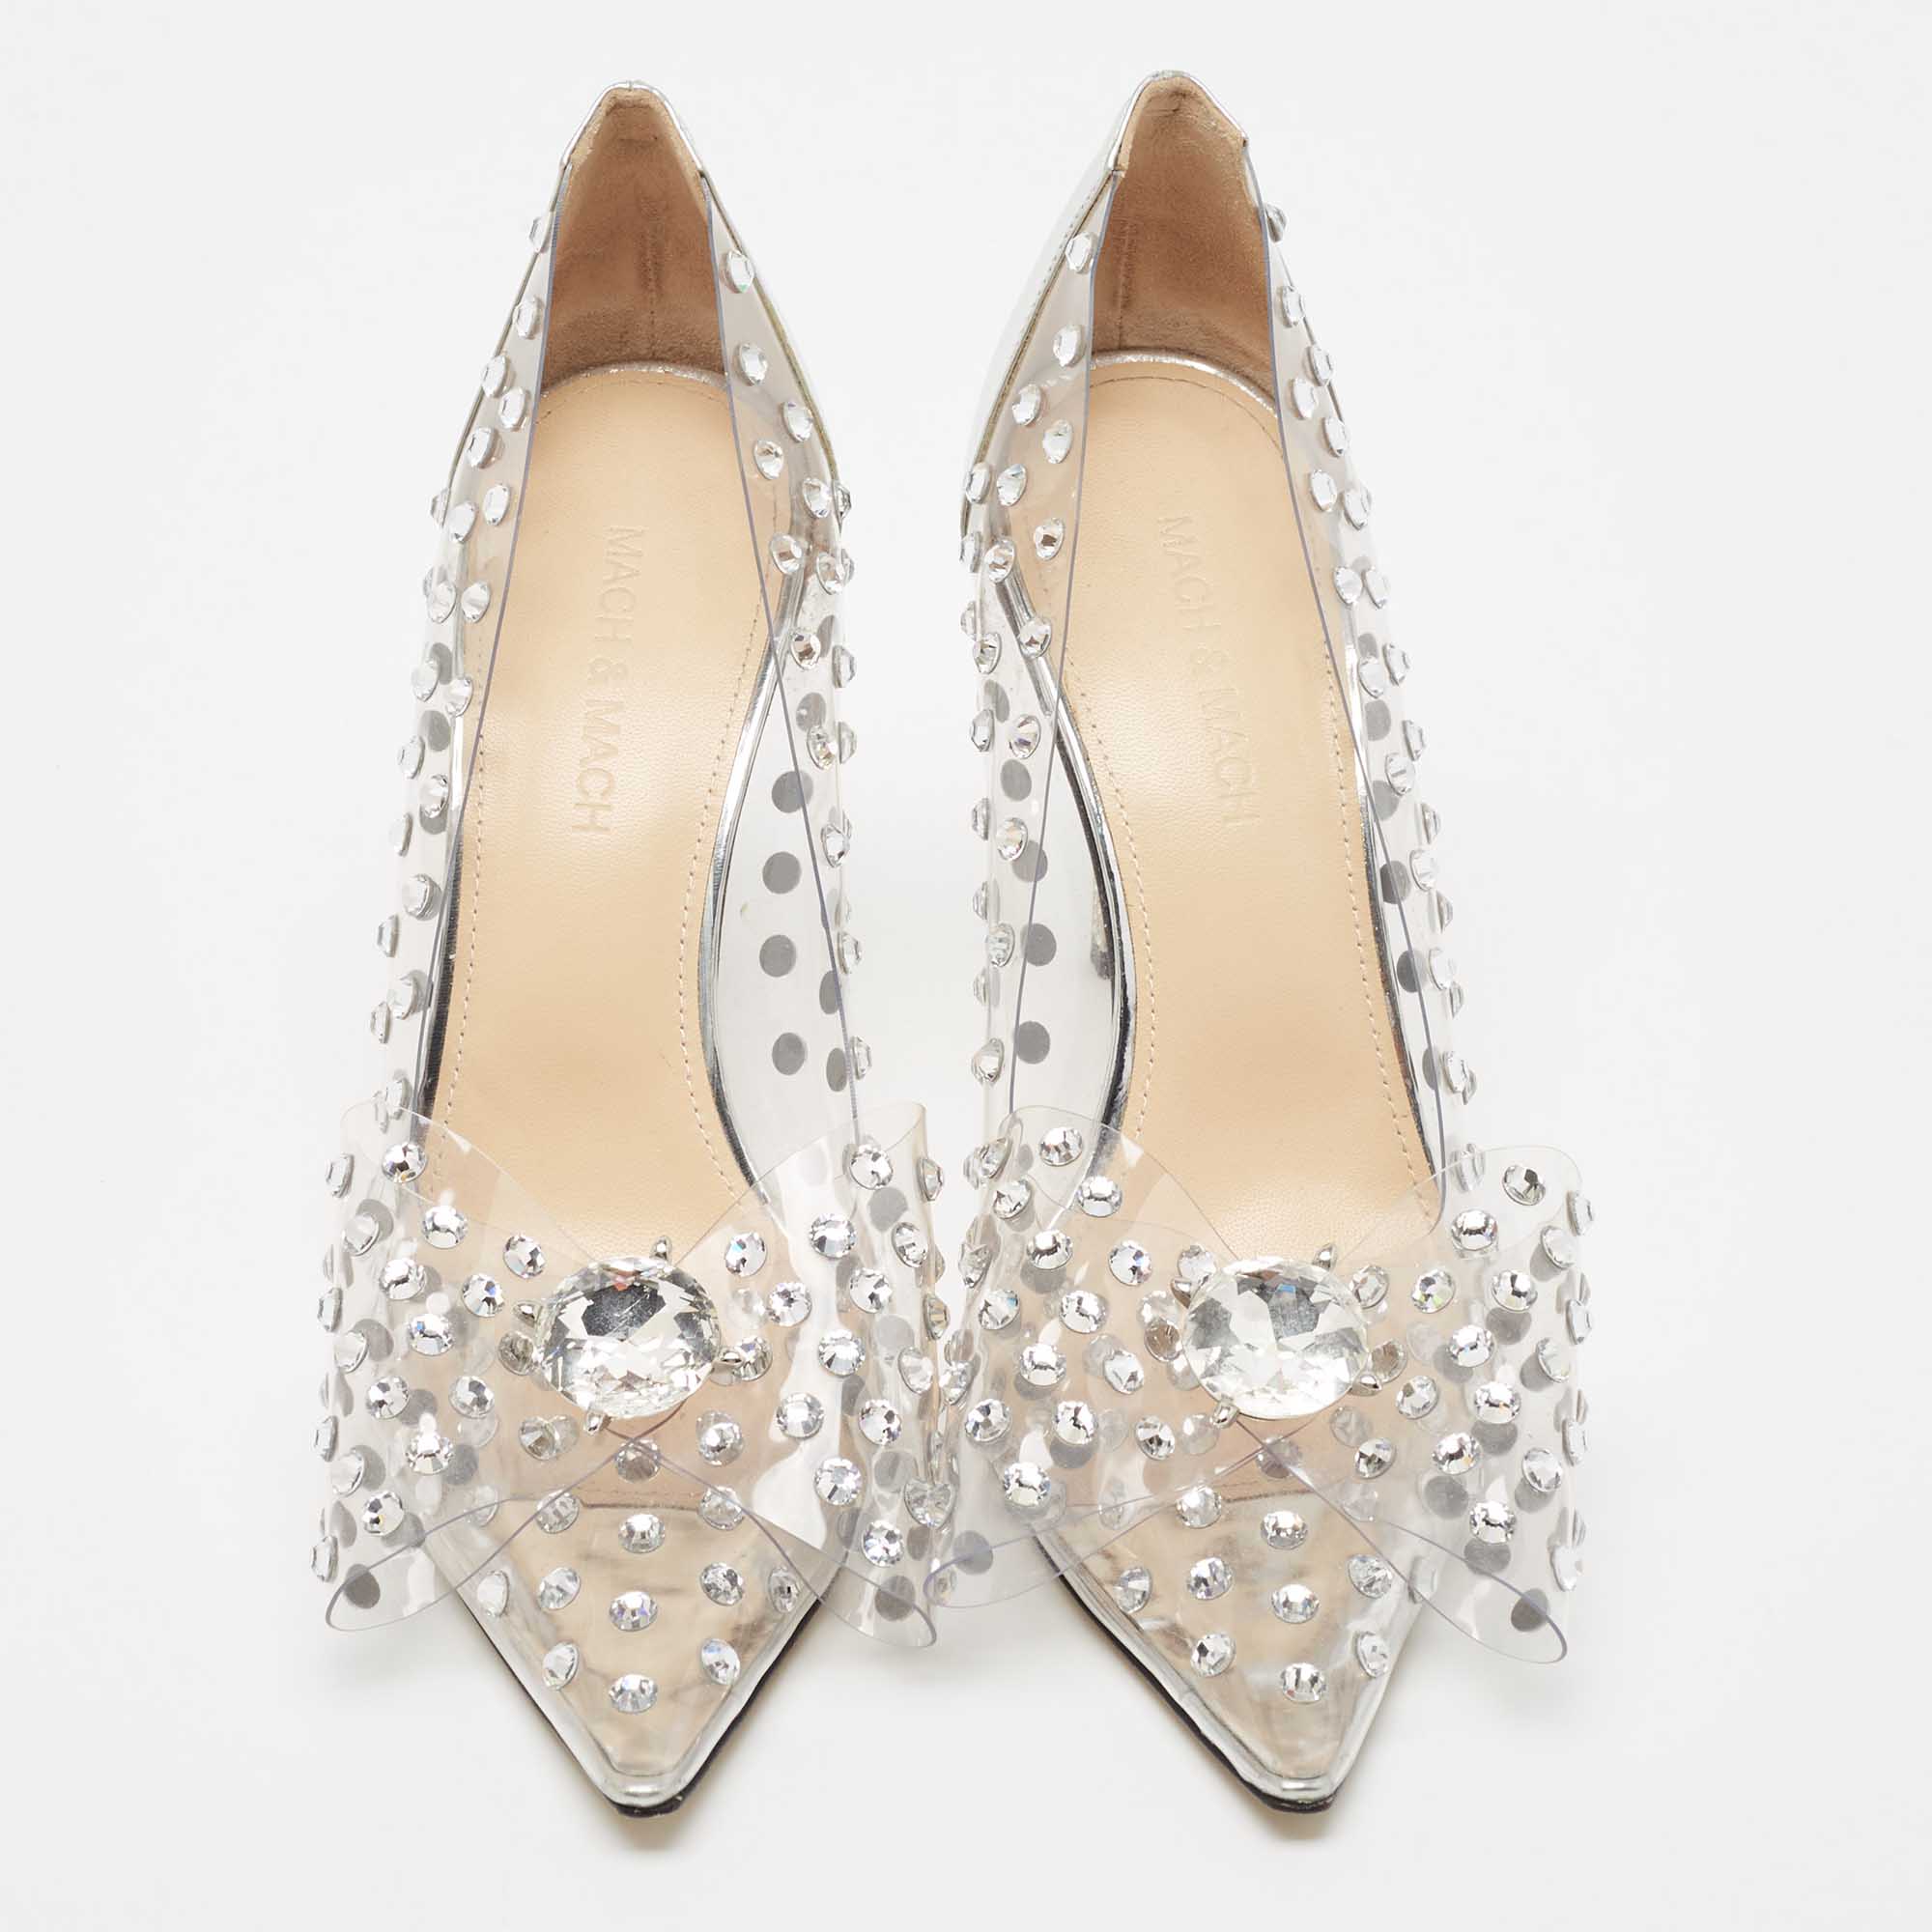 Mach & Mach Silver/Transparent PVC And Leather Crystal Embellished Pumps Size 37